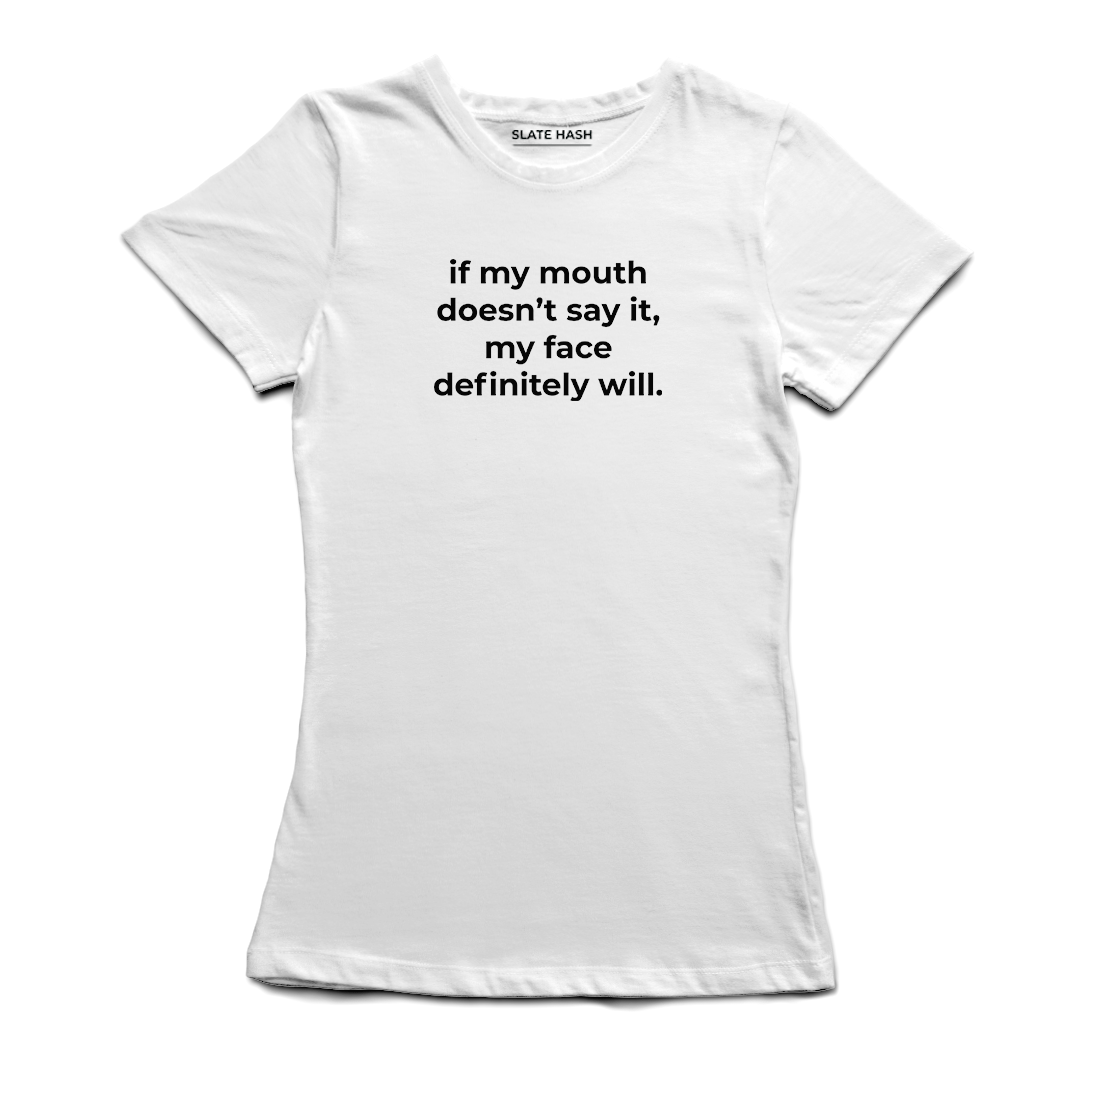 My face will say it T-Shirt